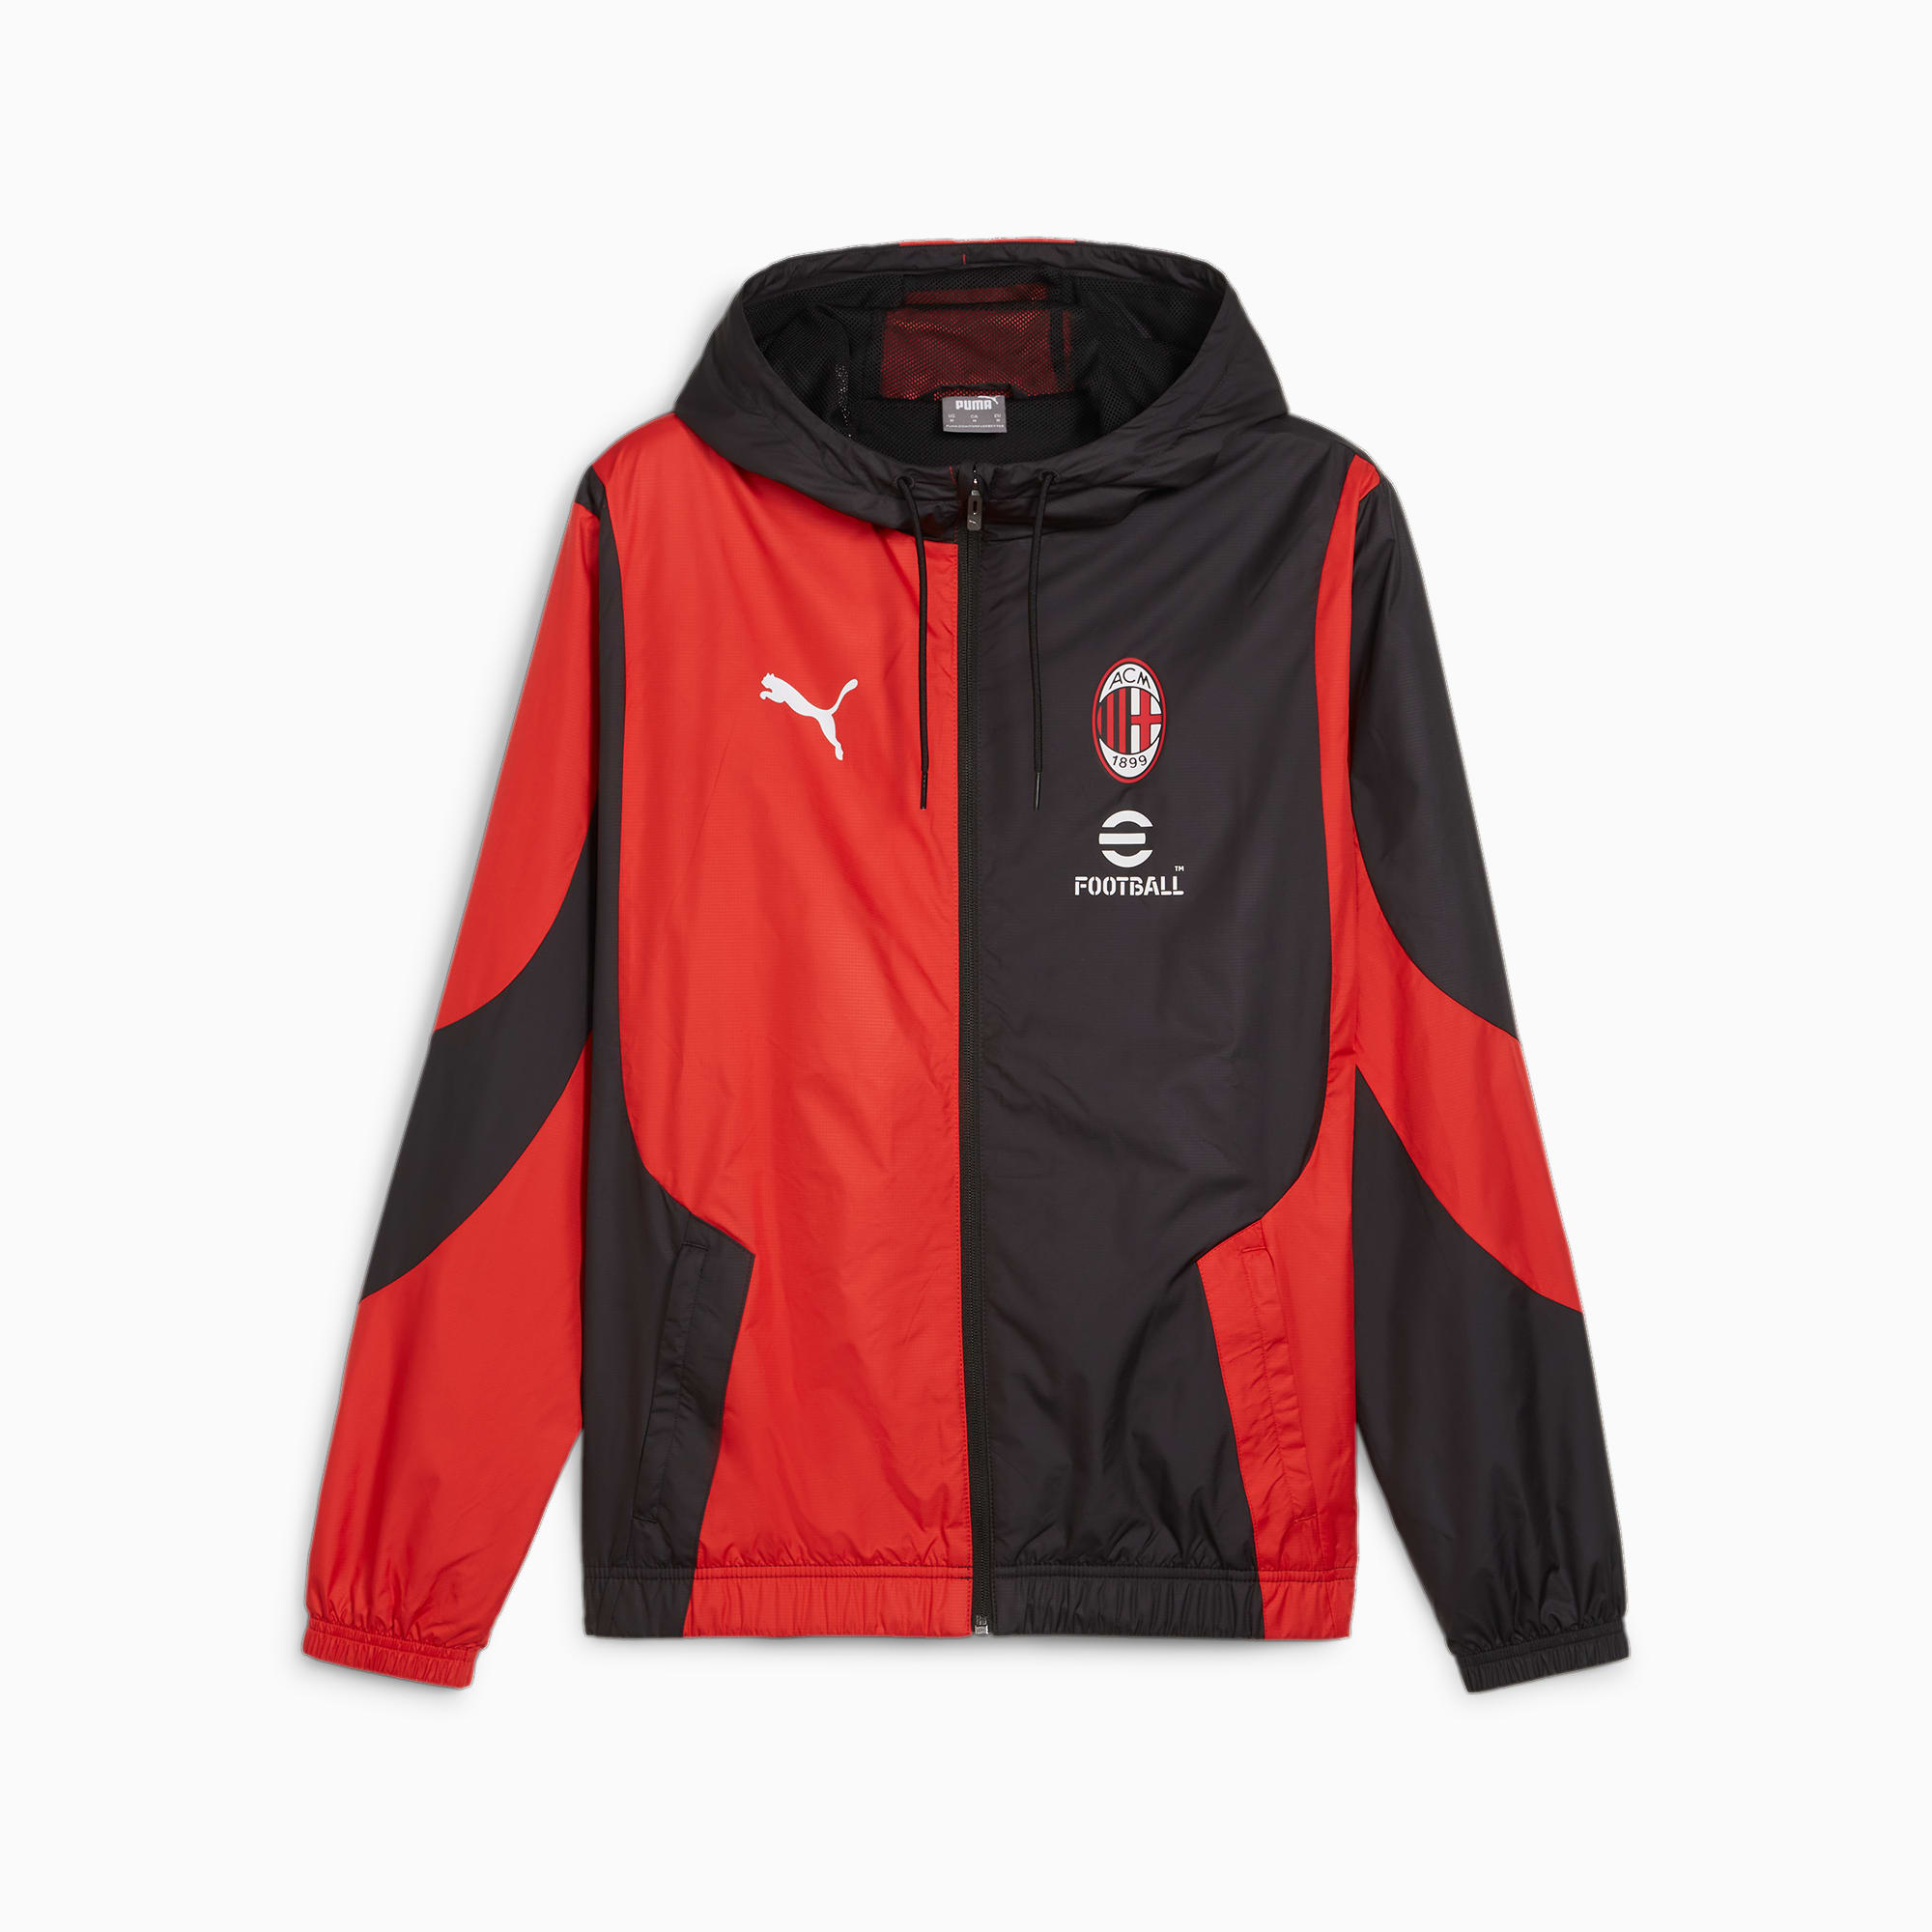 Men's PUMA AC Milan Pre-Match Jacket, Black/For All Time Red, Size L, Clothing